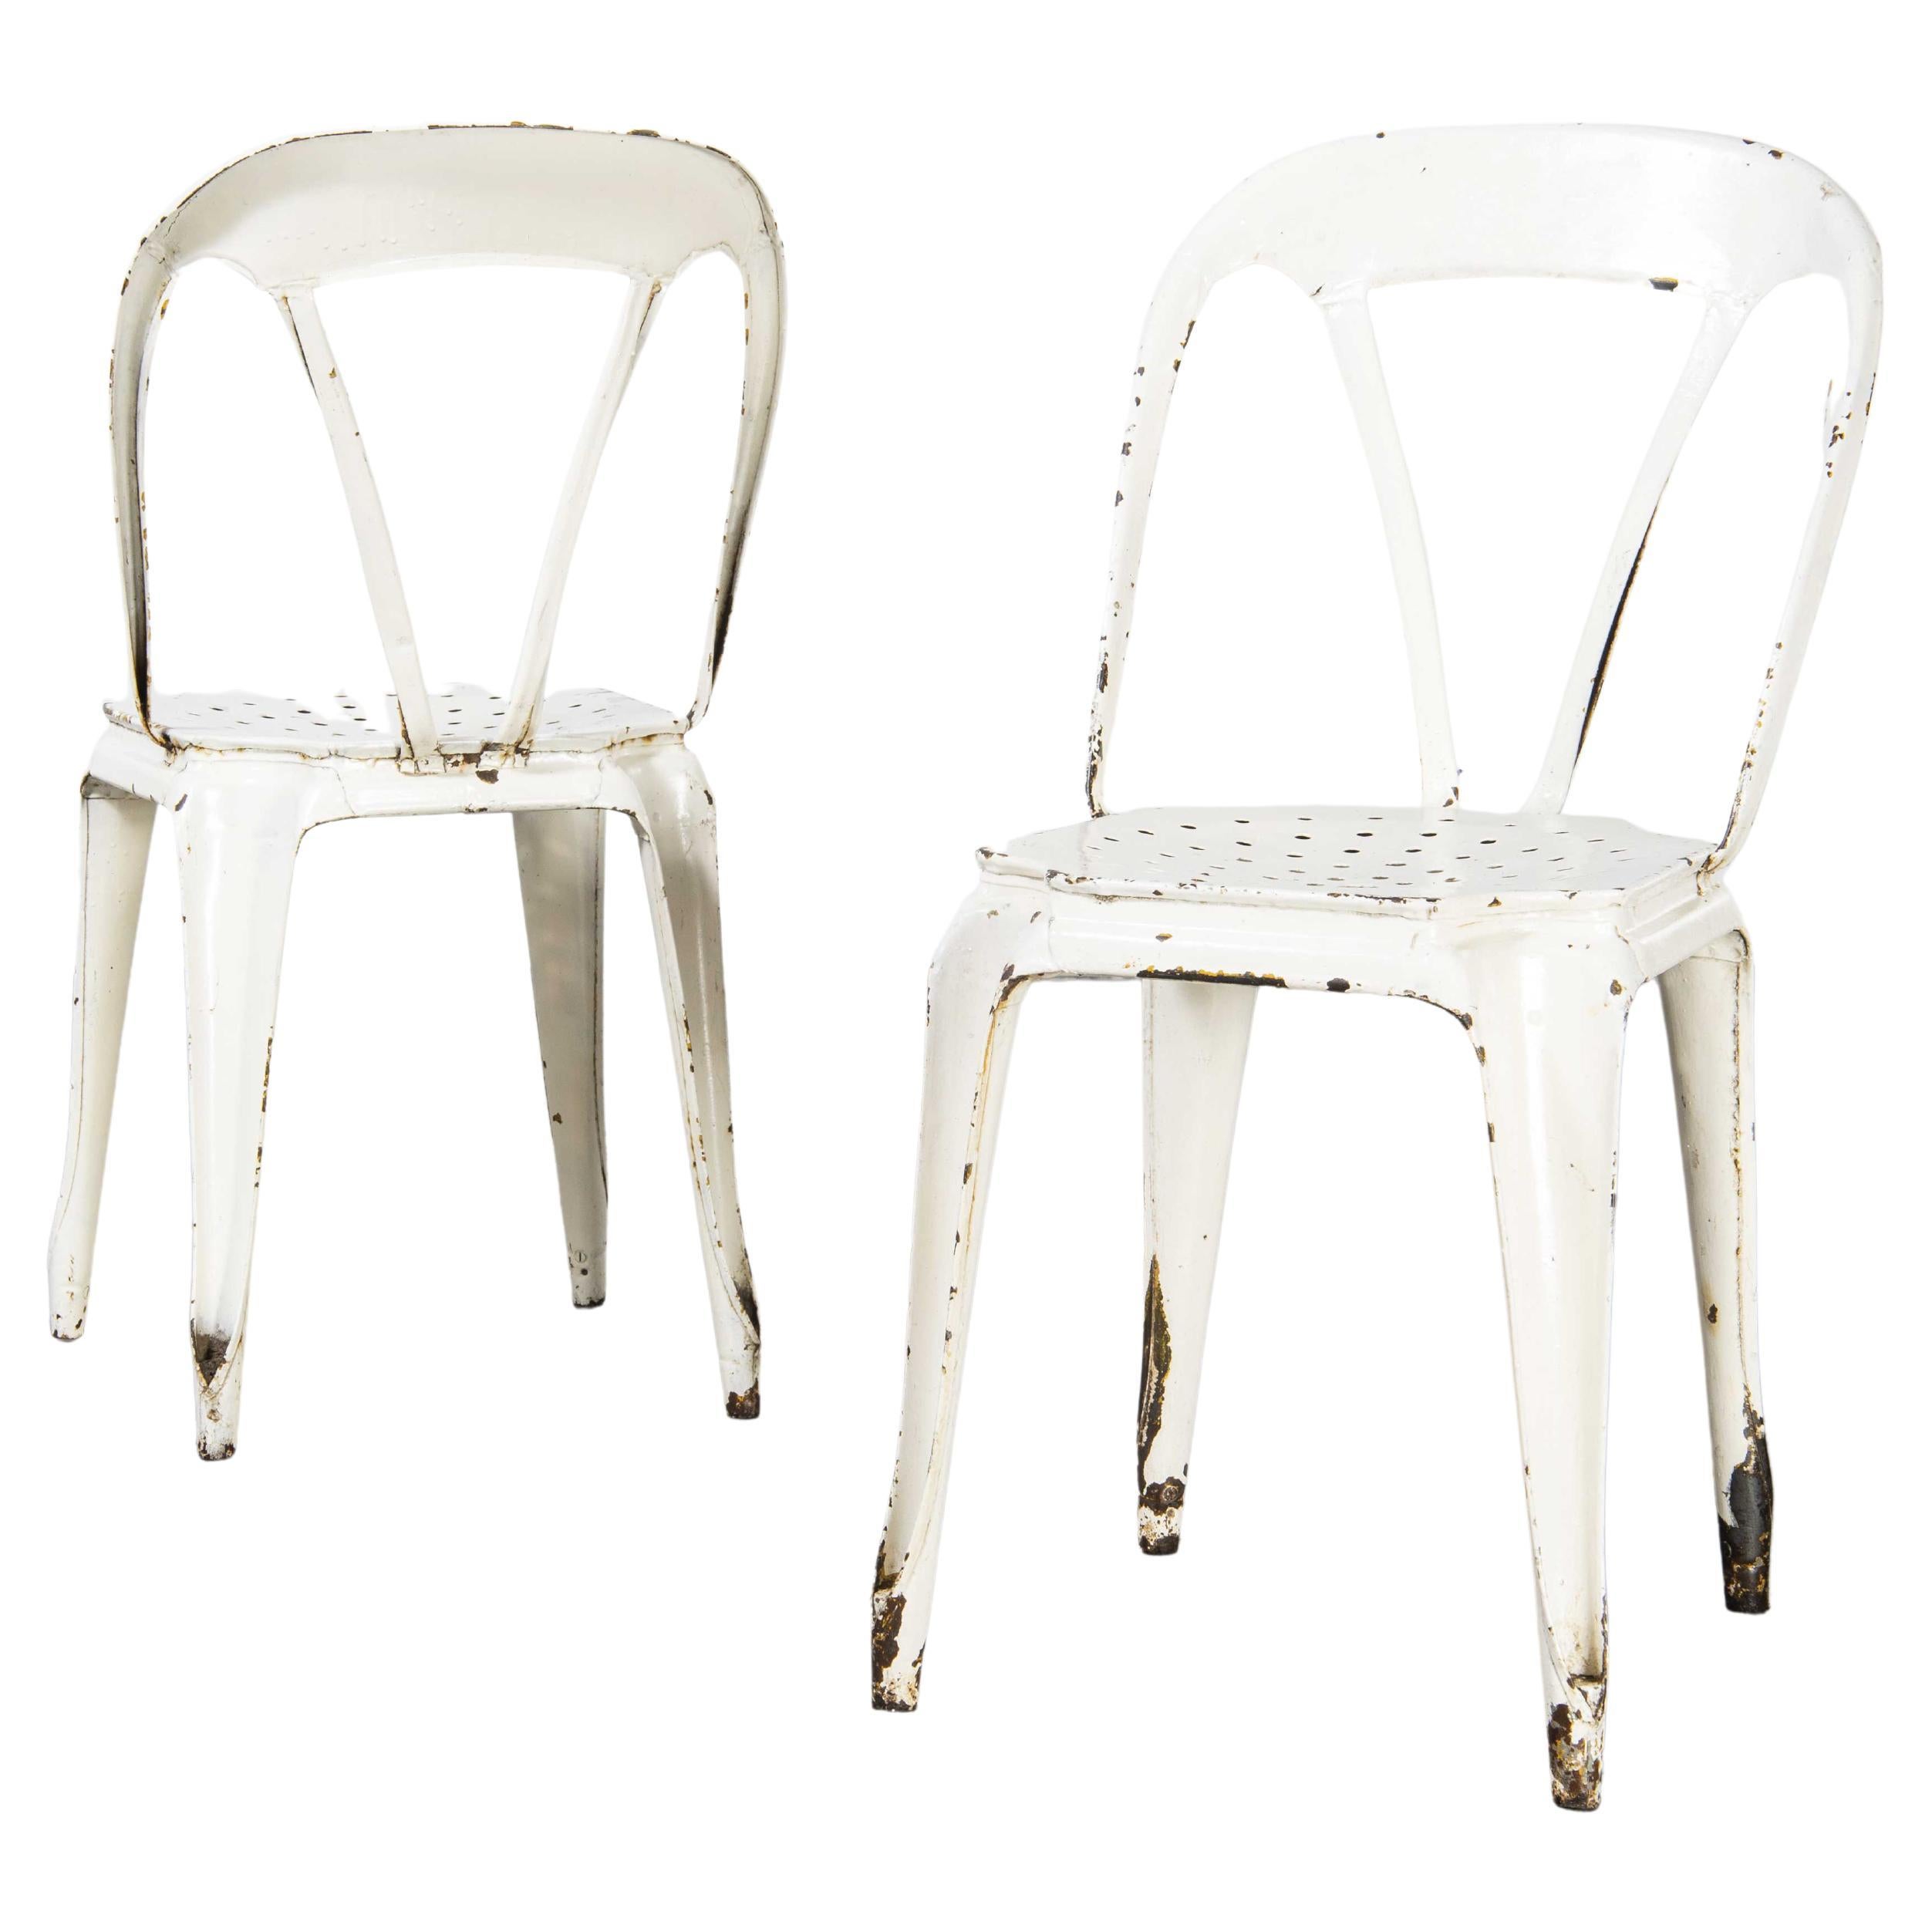 1950’s Original French Multipl’s Metal Dining Chairs, Pair For Sale